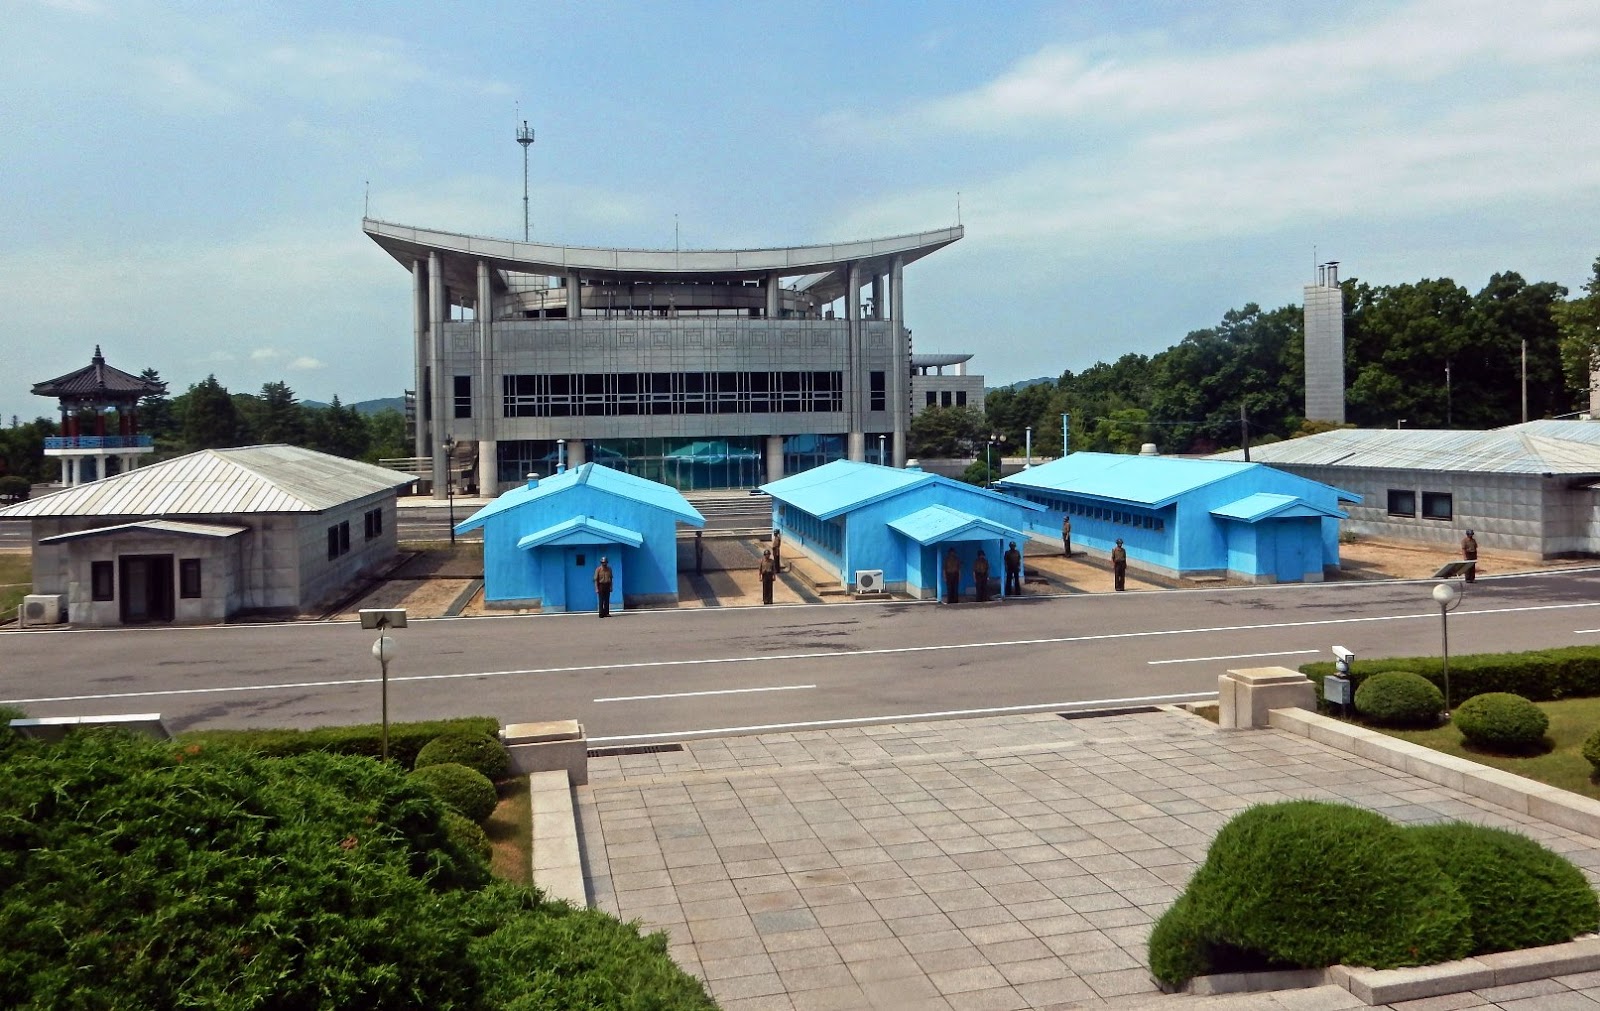 the viewing deck Panmunjom (38th Parallel DMZ) and